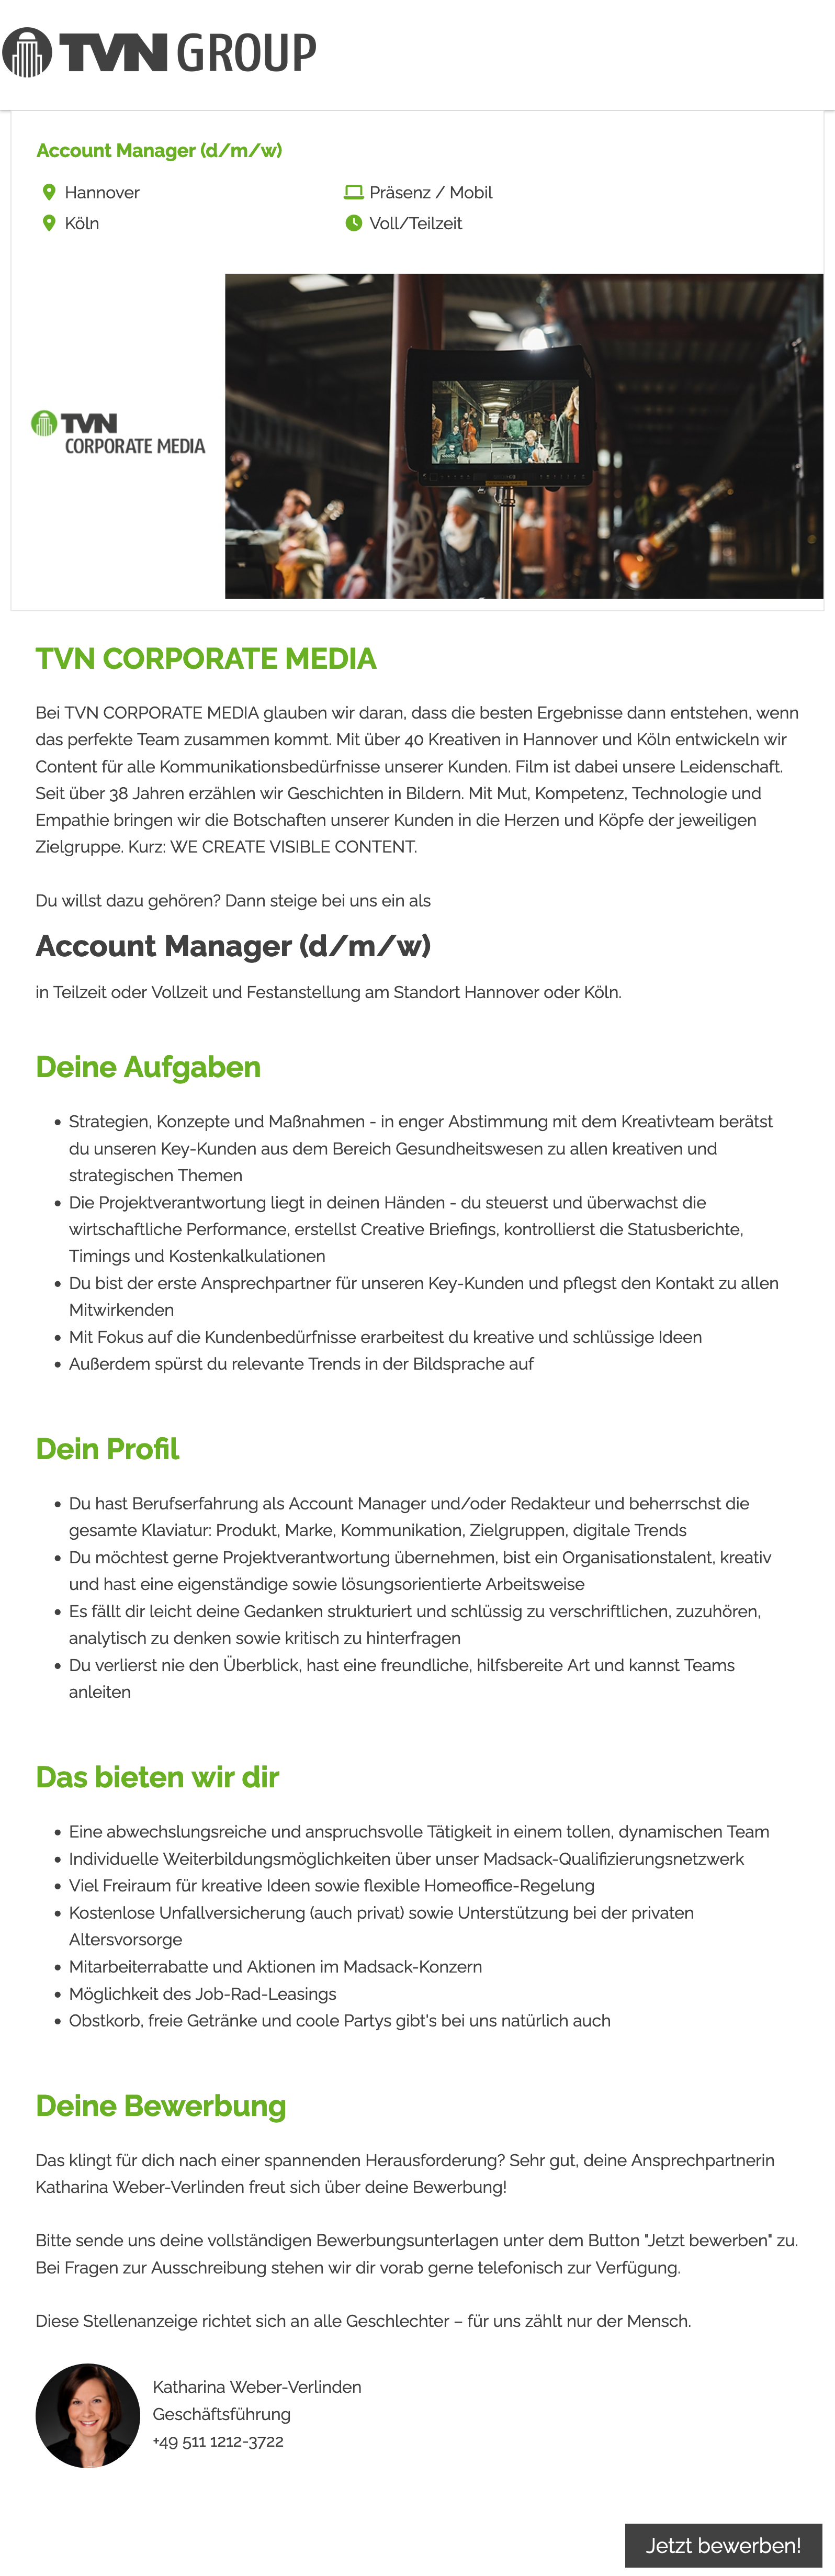 Account Manager (d/m/w)